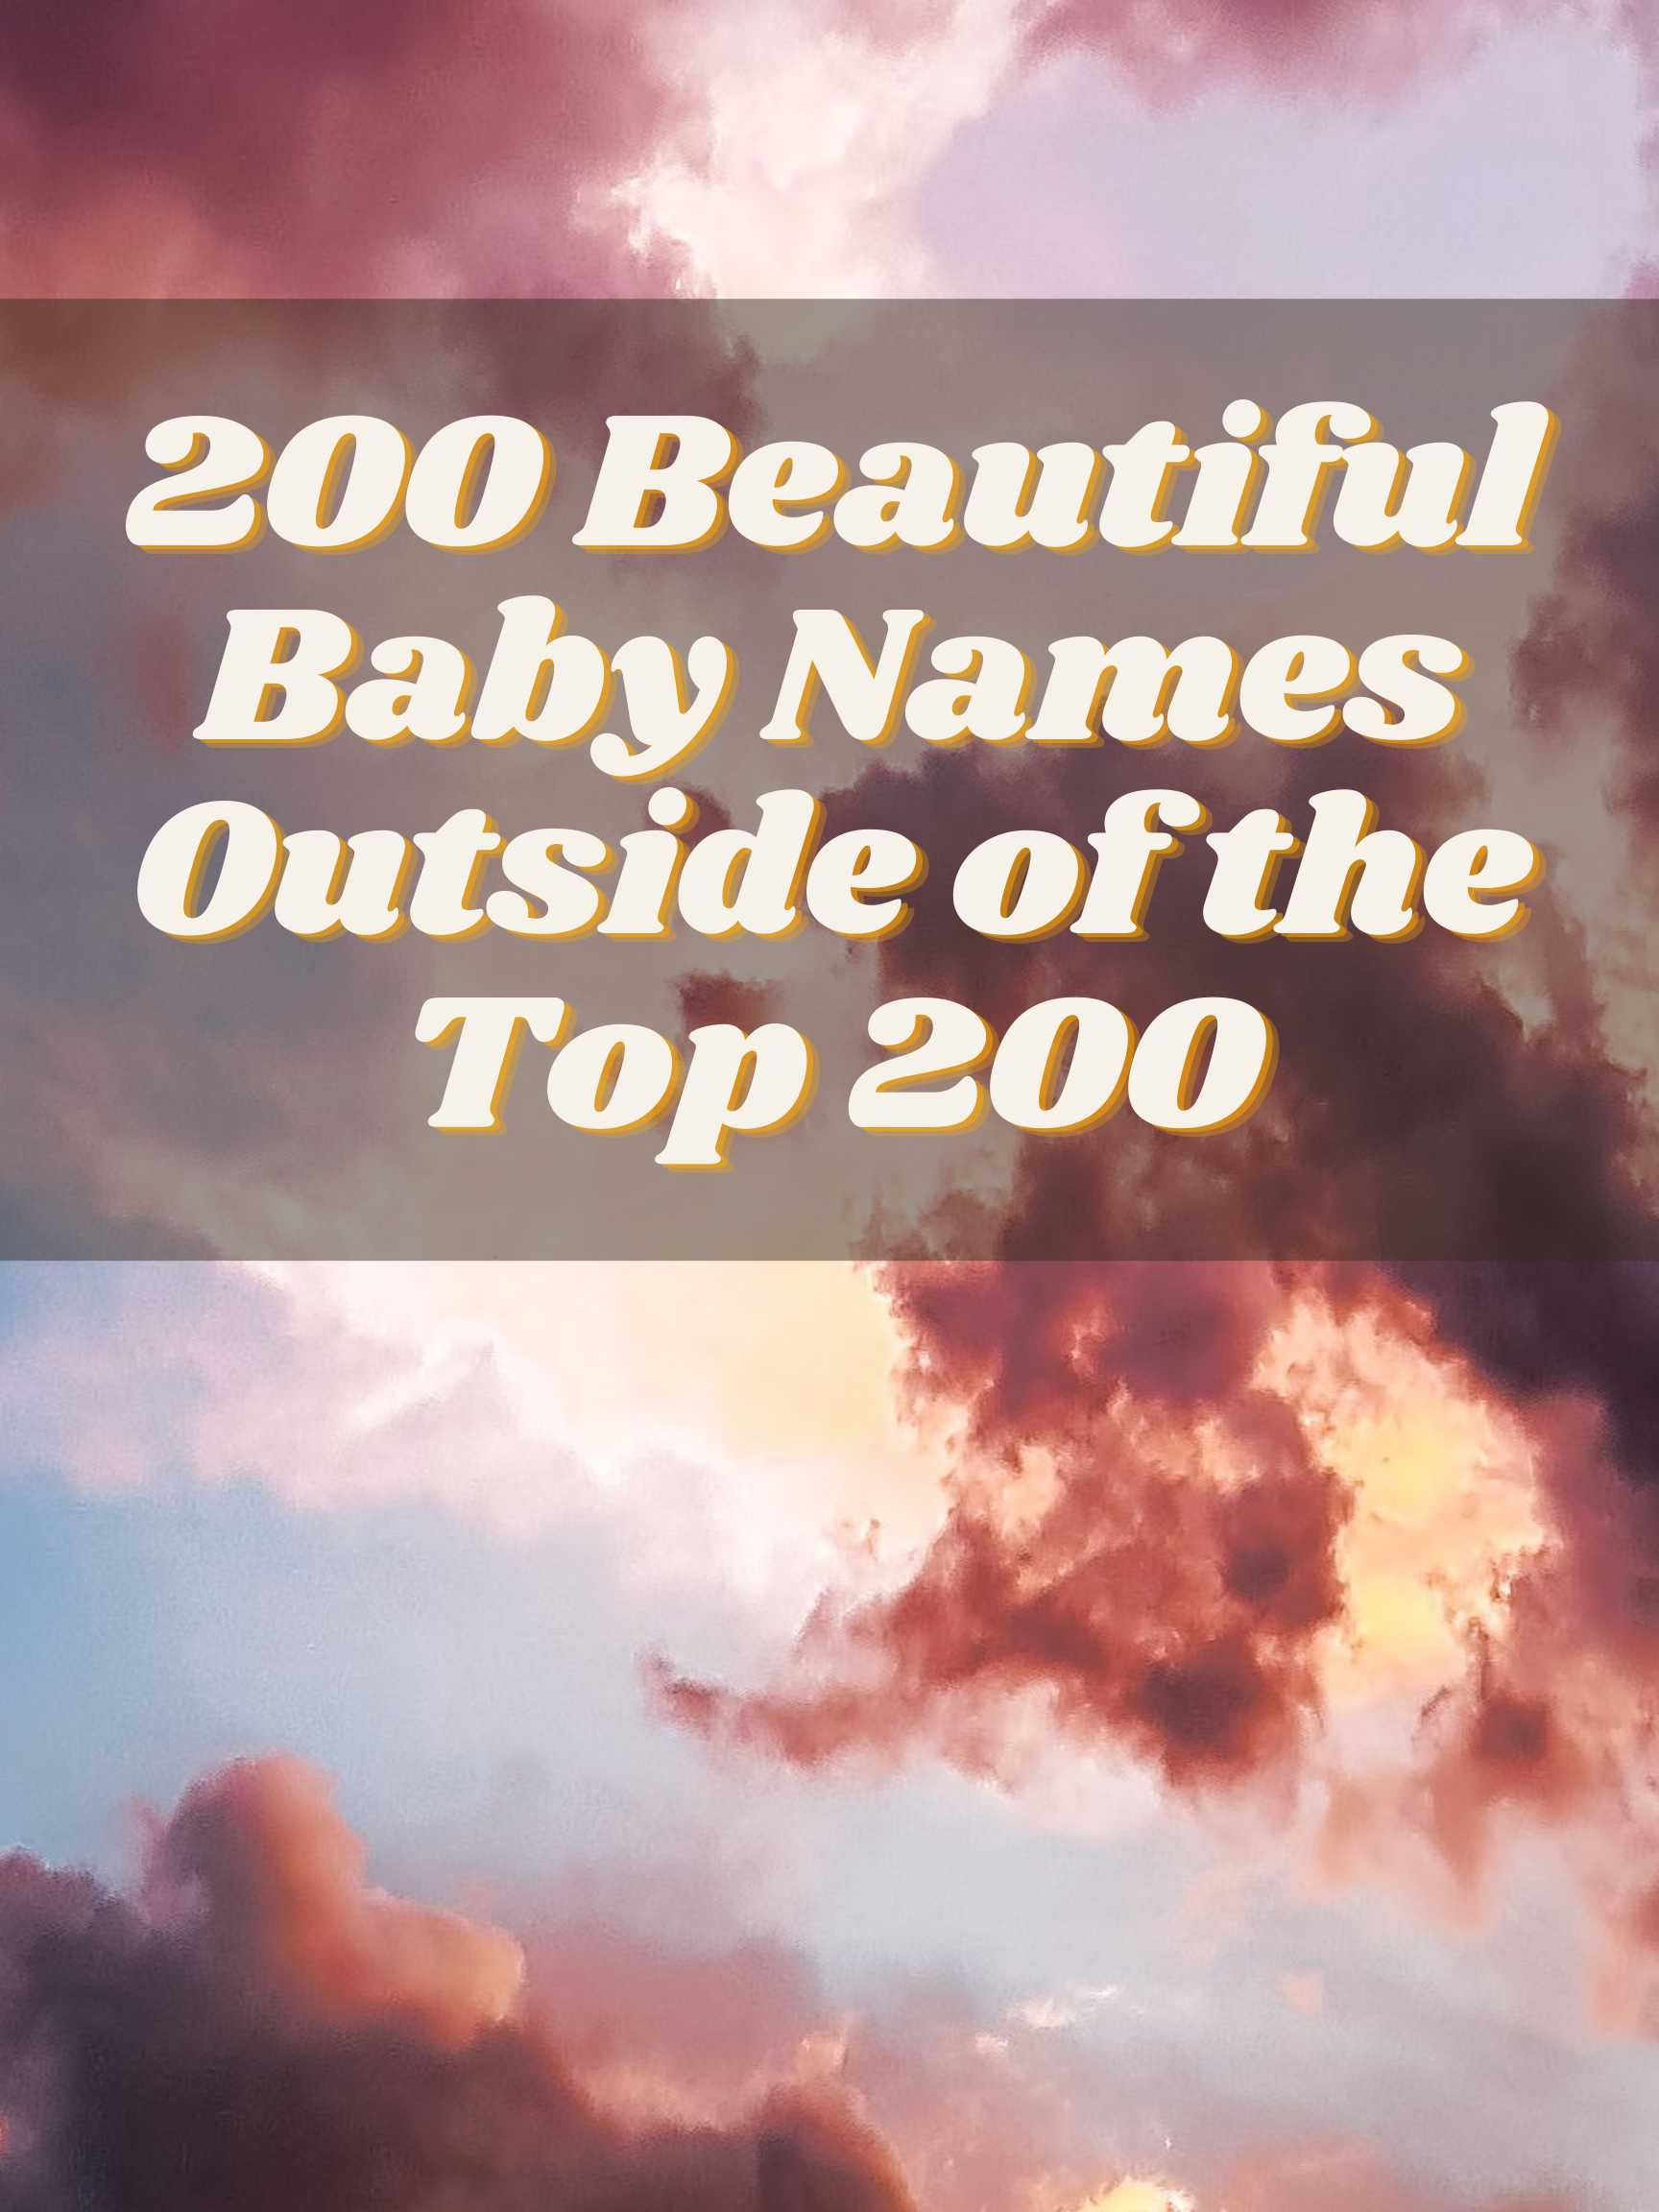 200 Beautiful Baby Names Outside of the Top 200